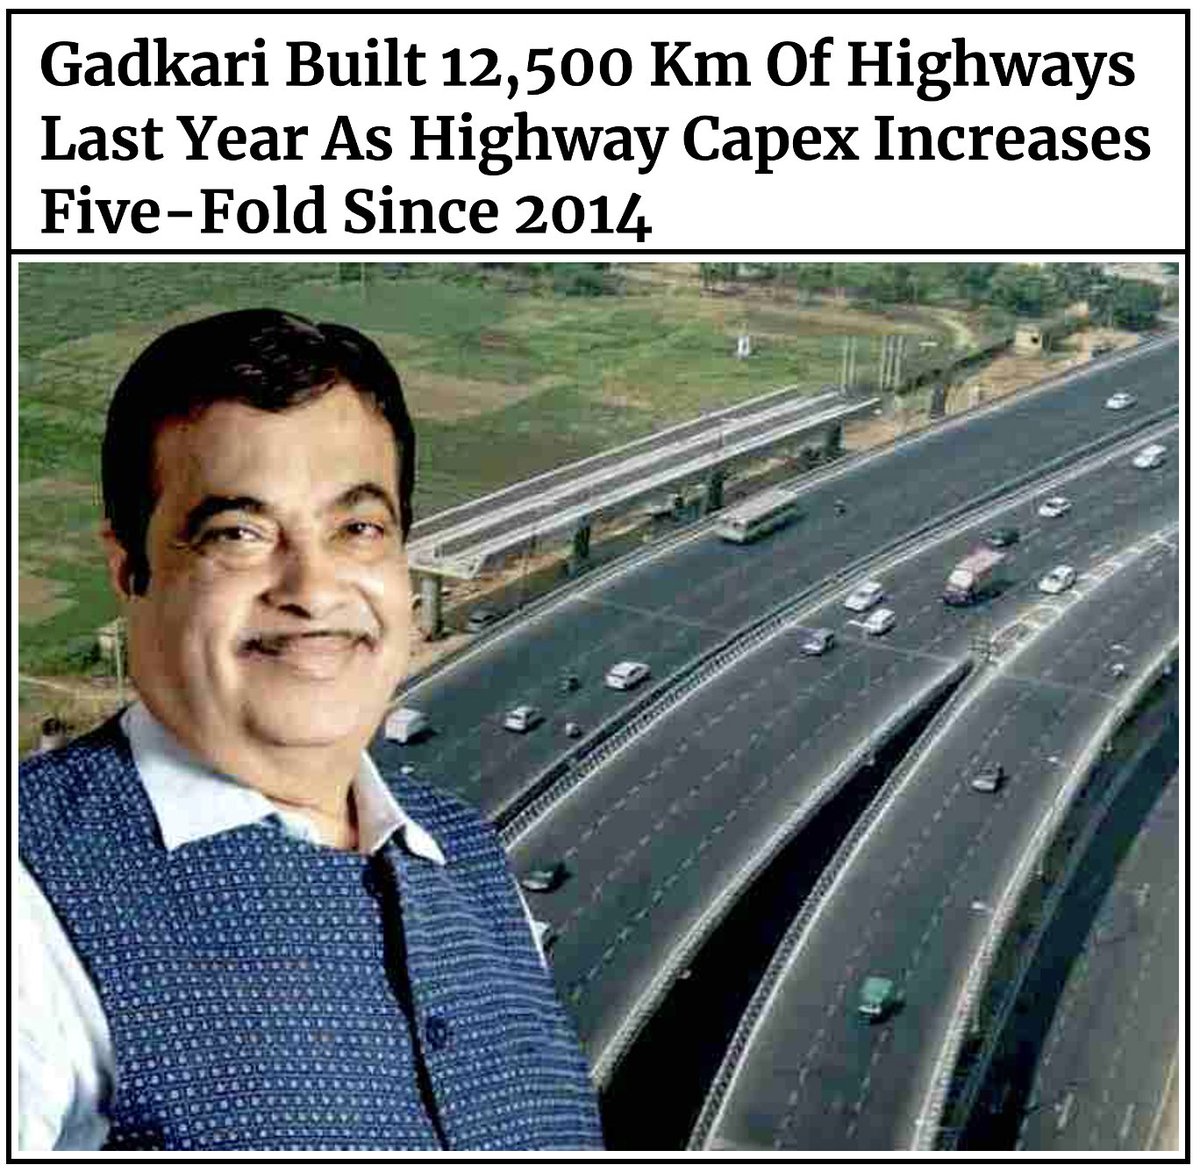 India added more half the length of national highways (54,858 km) in the last ten years than it had in seventy years before that (91,287 km). Gadkari is not human. Gadkari is alien.